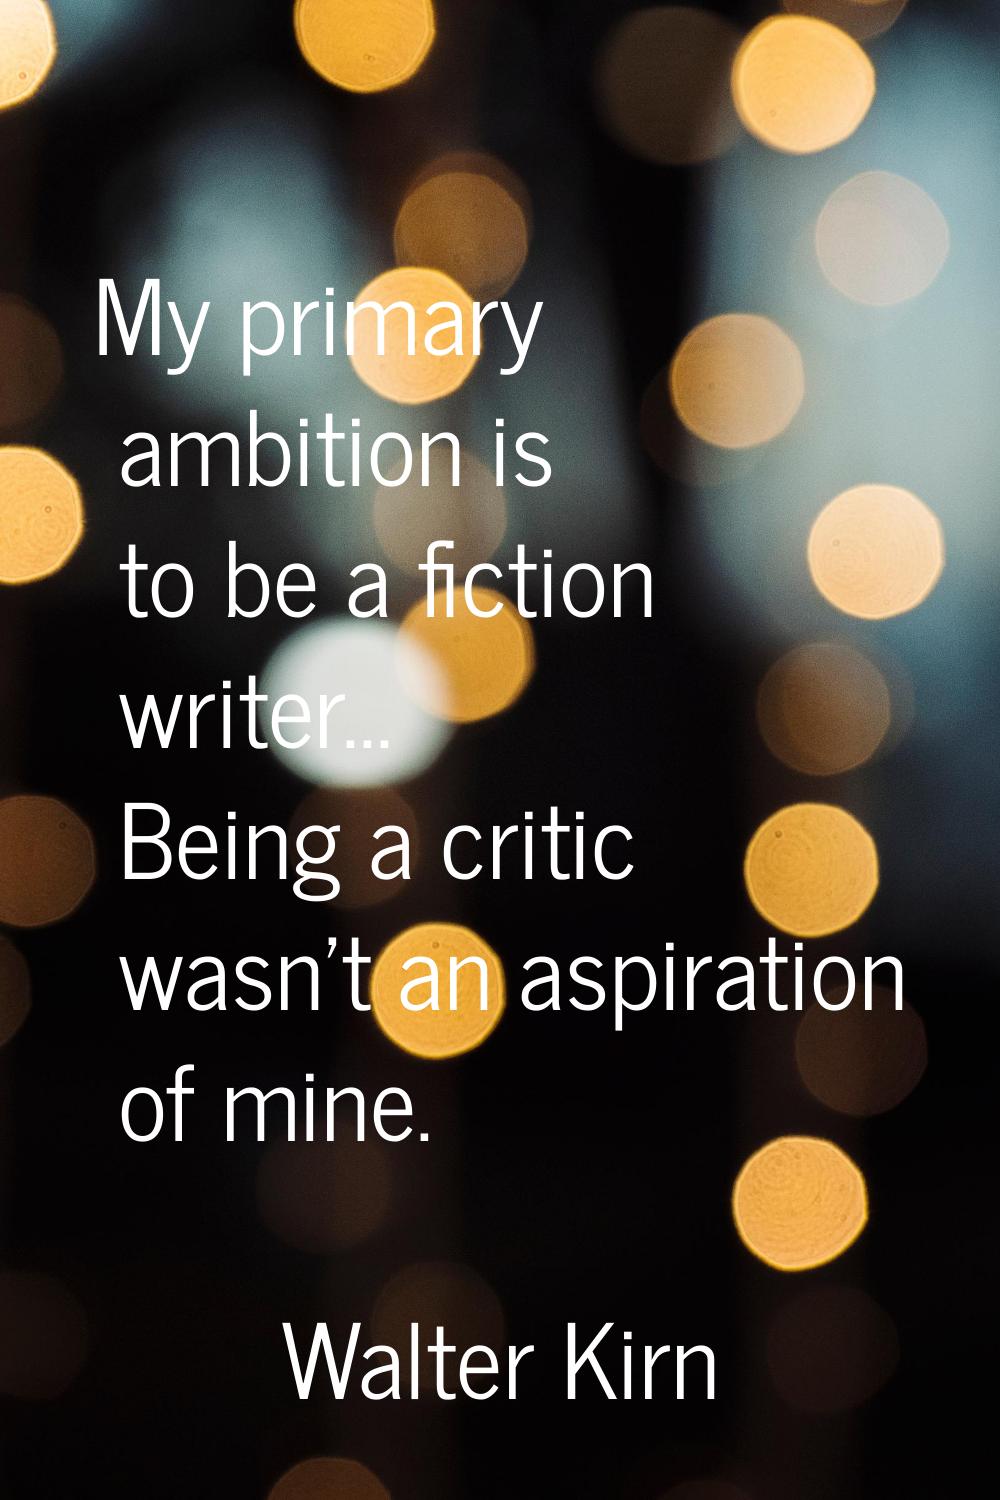 My primary ambition is to be a fiction writer... Being a critic wasn't an aspiration of mine.